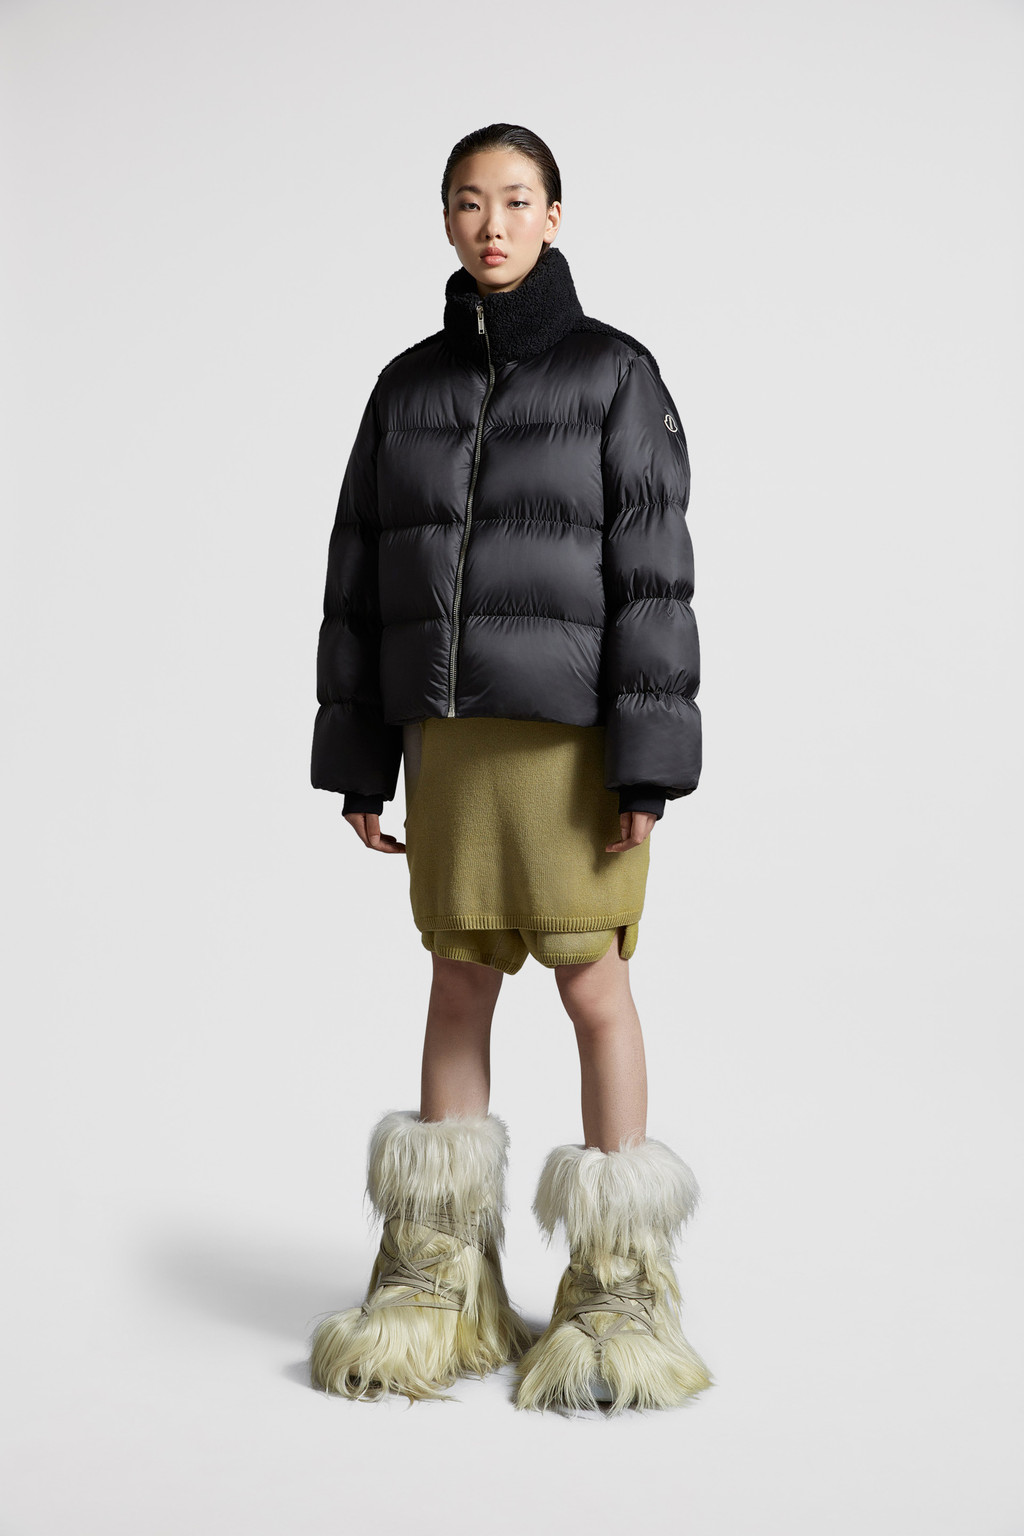 For Special Projects - Moncler + Rick Owens | Moncler RO